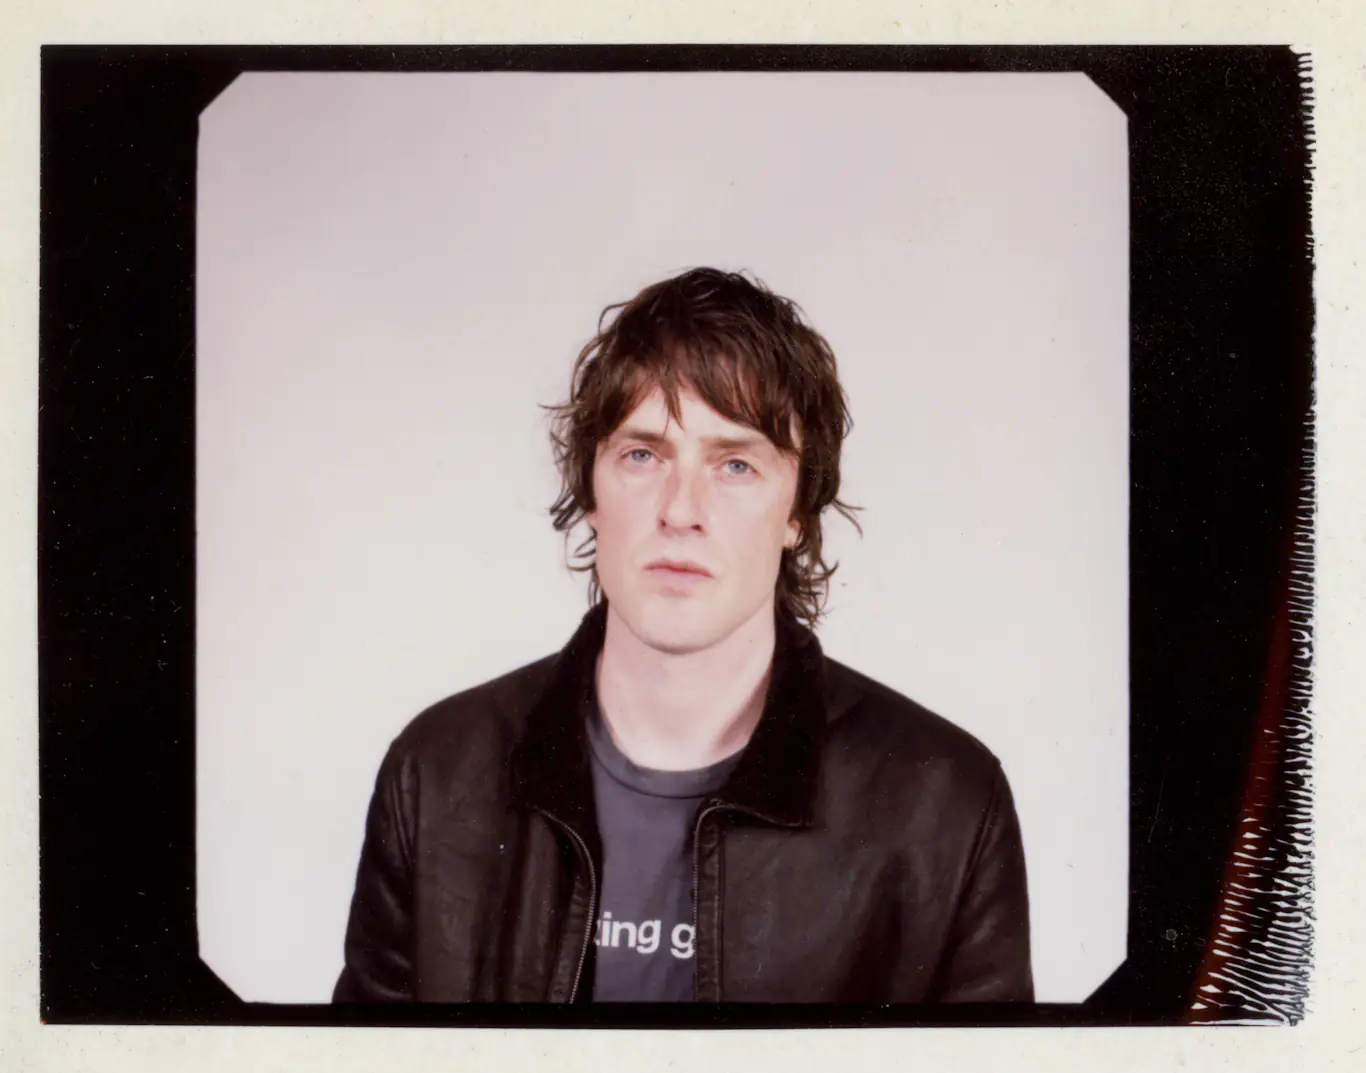 SPIRITUALIZED announce the reissue of ‘Amazing Grace’